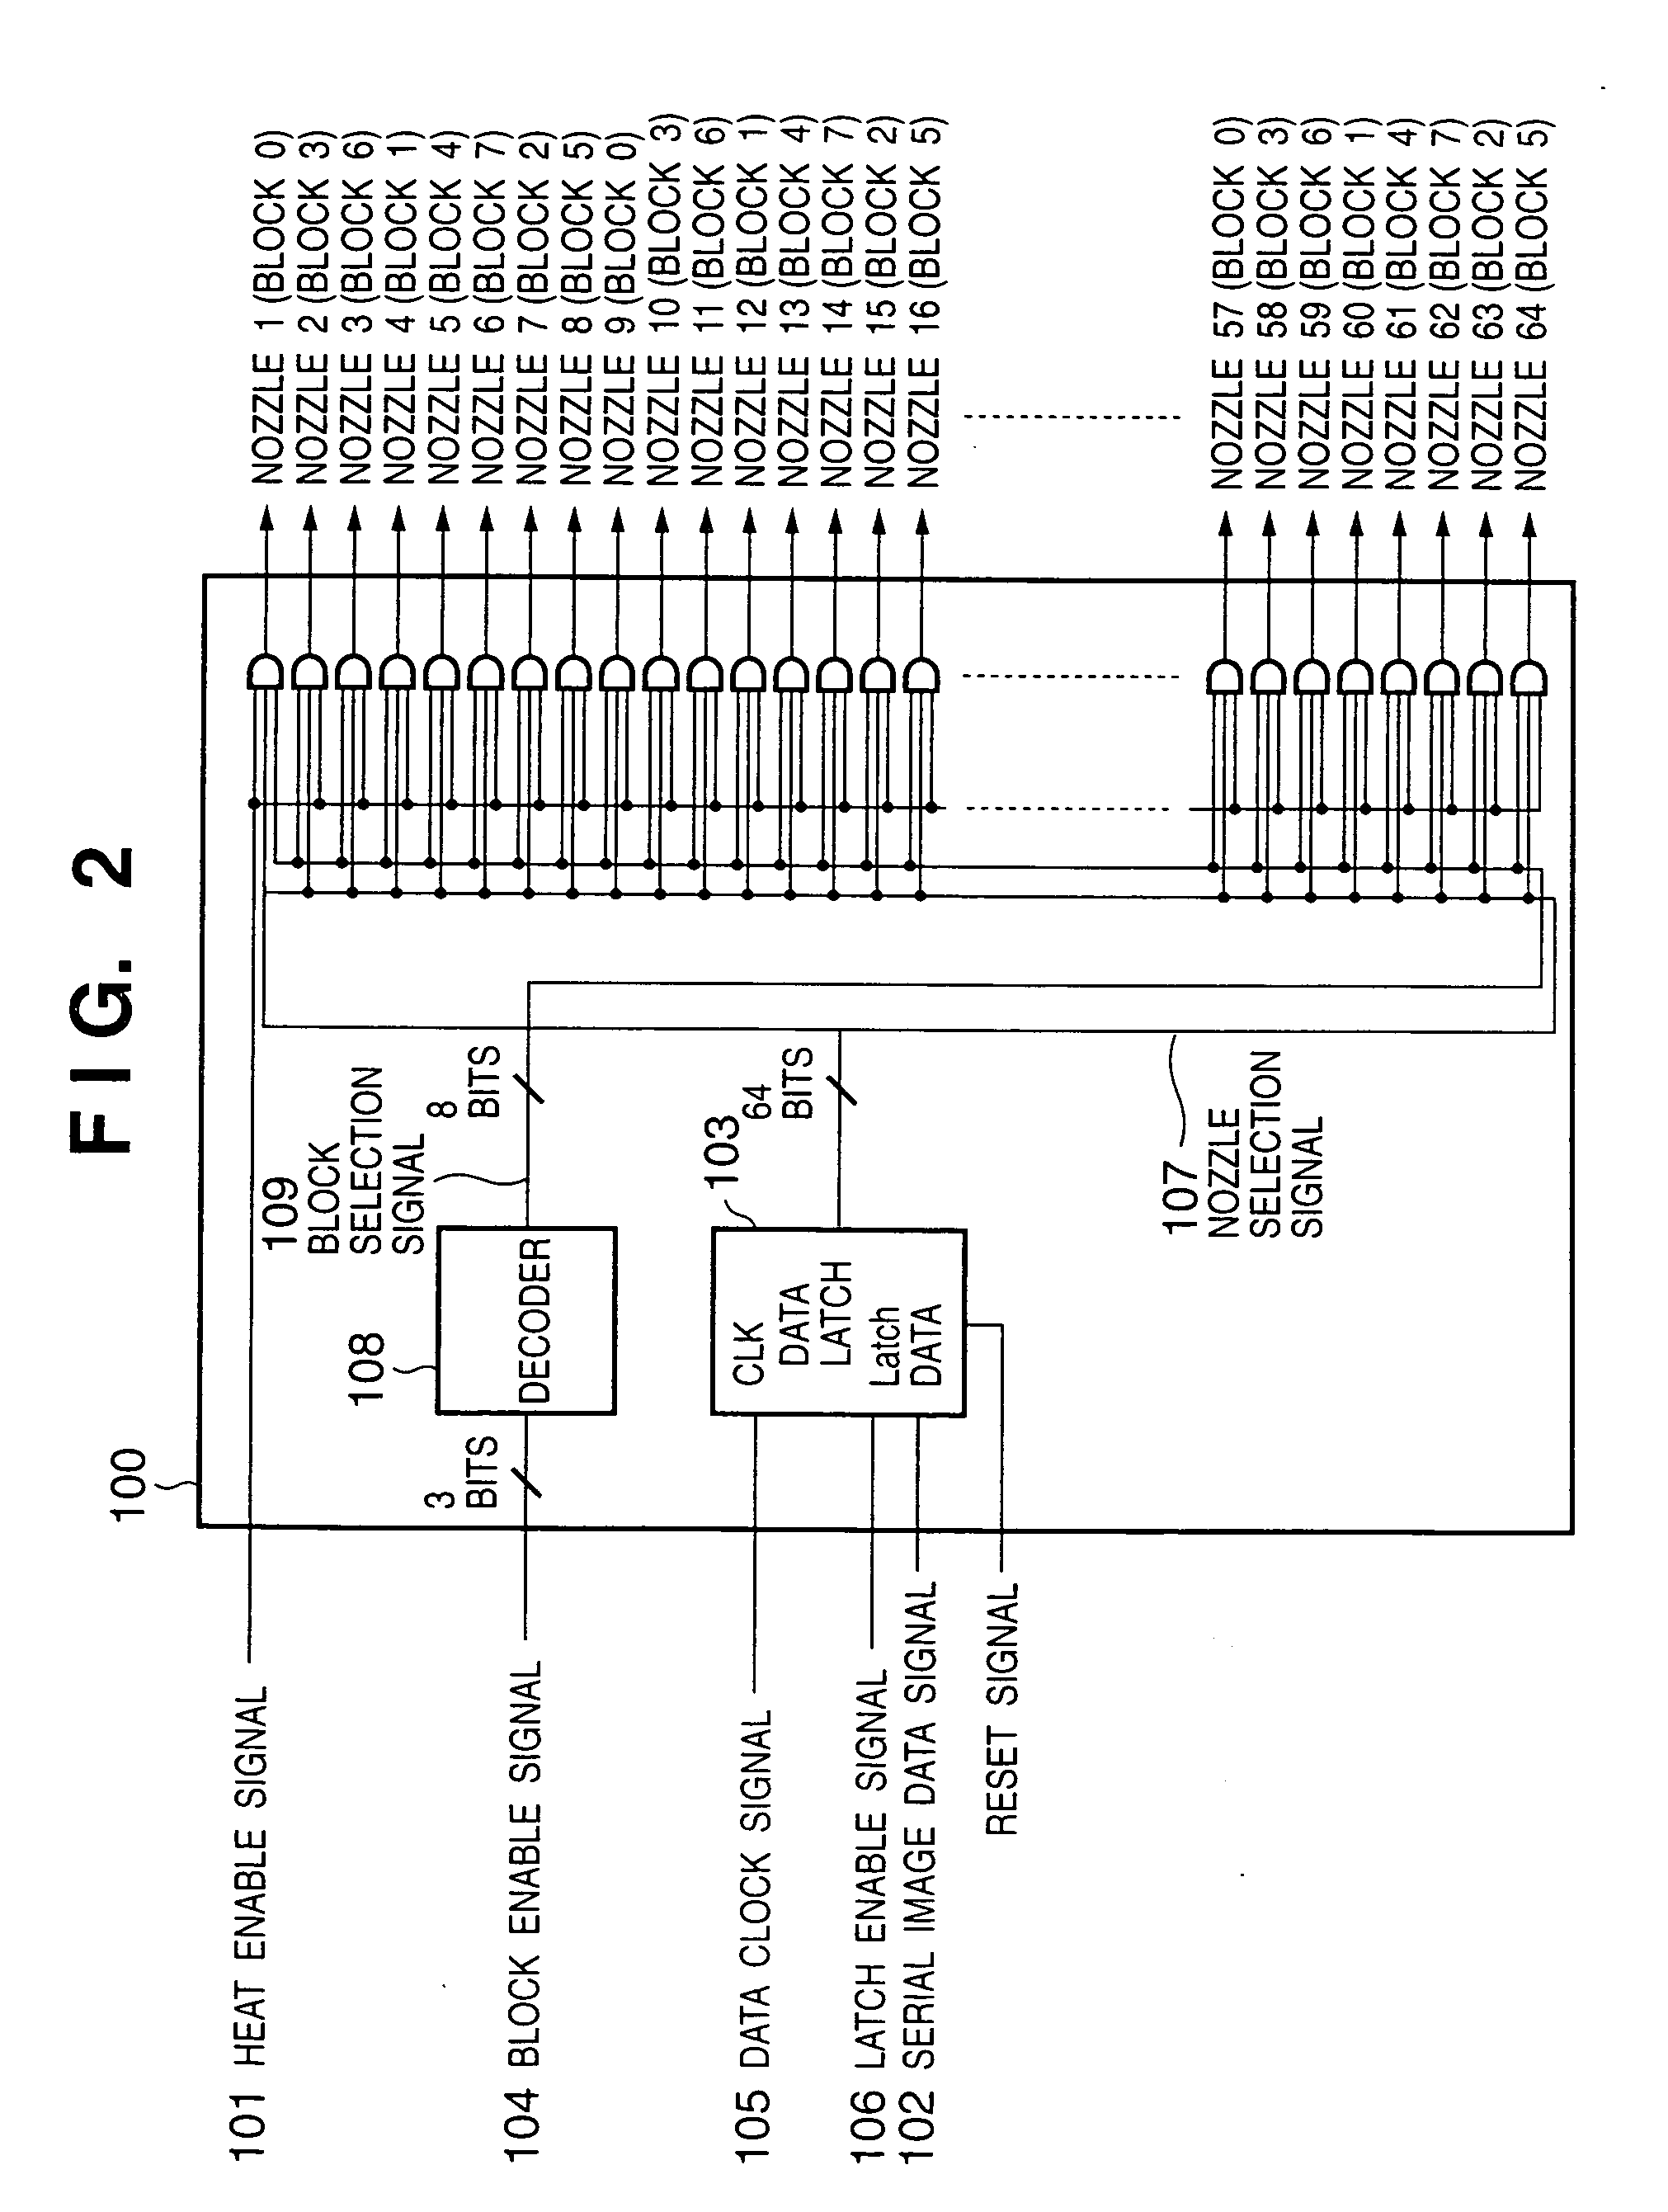 Printing head, image printing apparatus using the same, and control method therefor